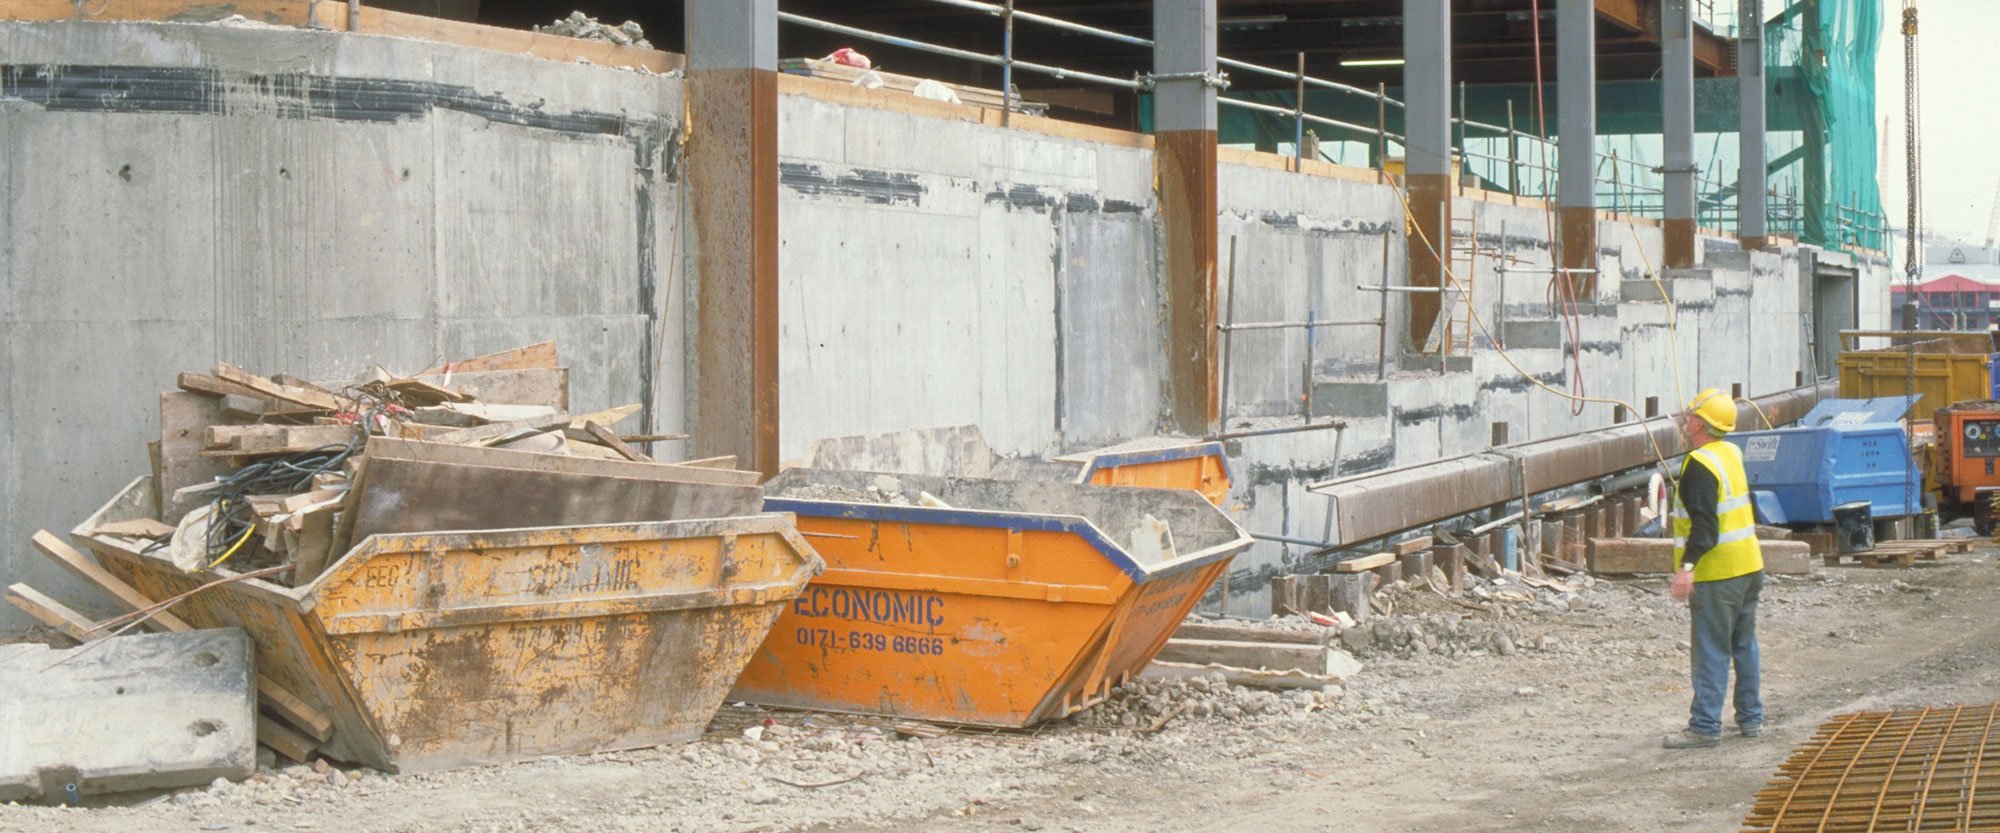 Construction site with skips